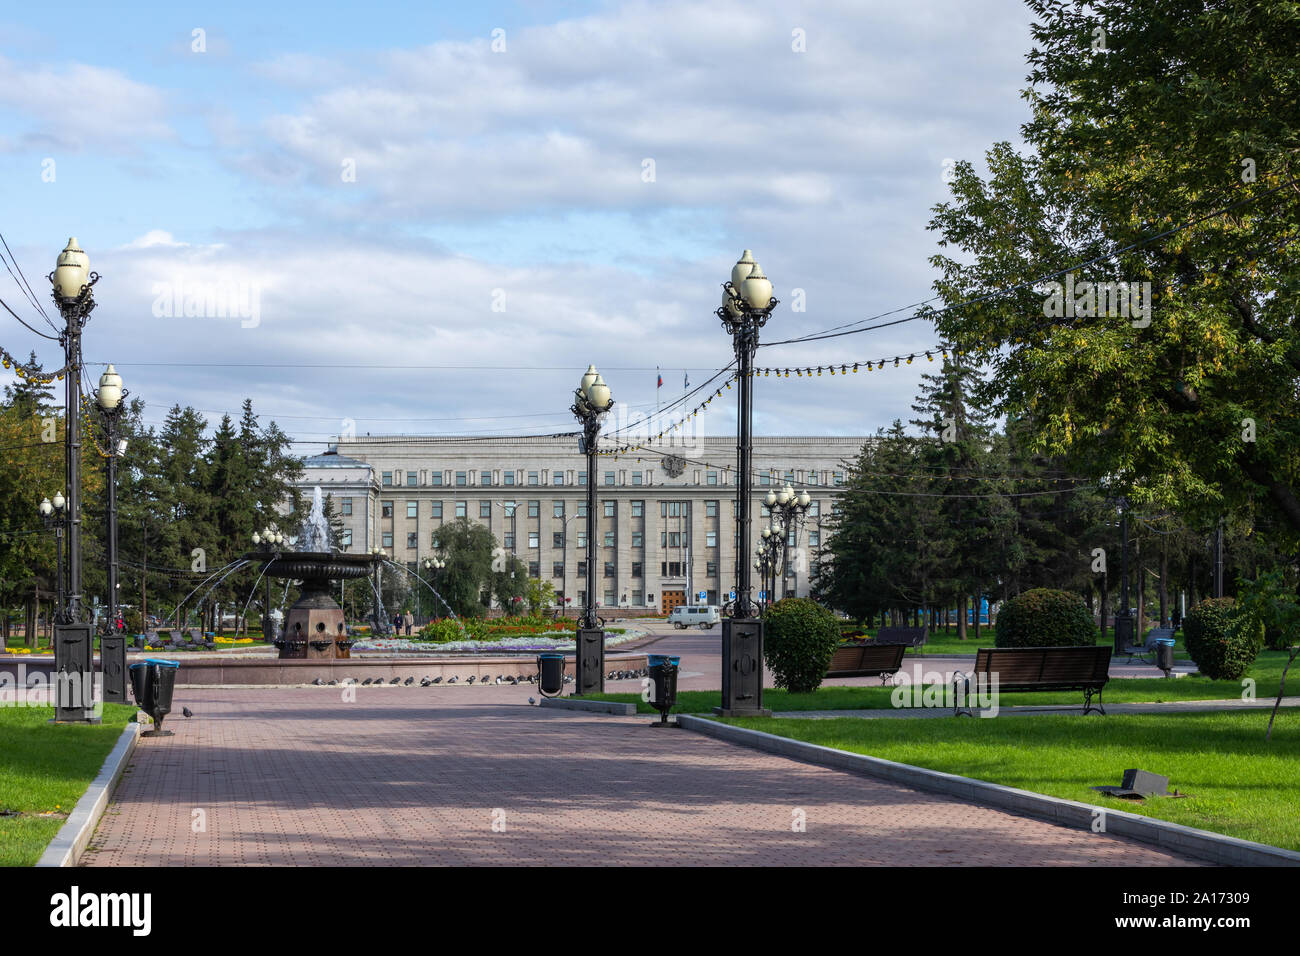 IRKUTSK, RUSSIA - SEPTEMBER 08, 2019: House of Soviets, Government of the Irkutsk Region. Regional Administration building in the center of city and m Stock Photo